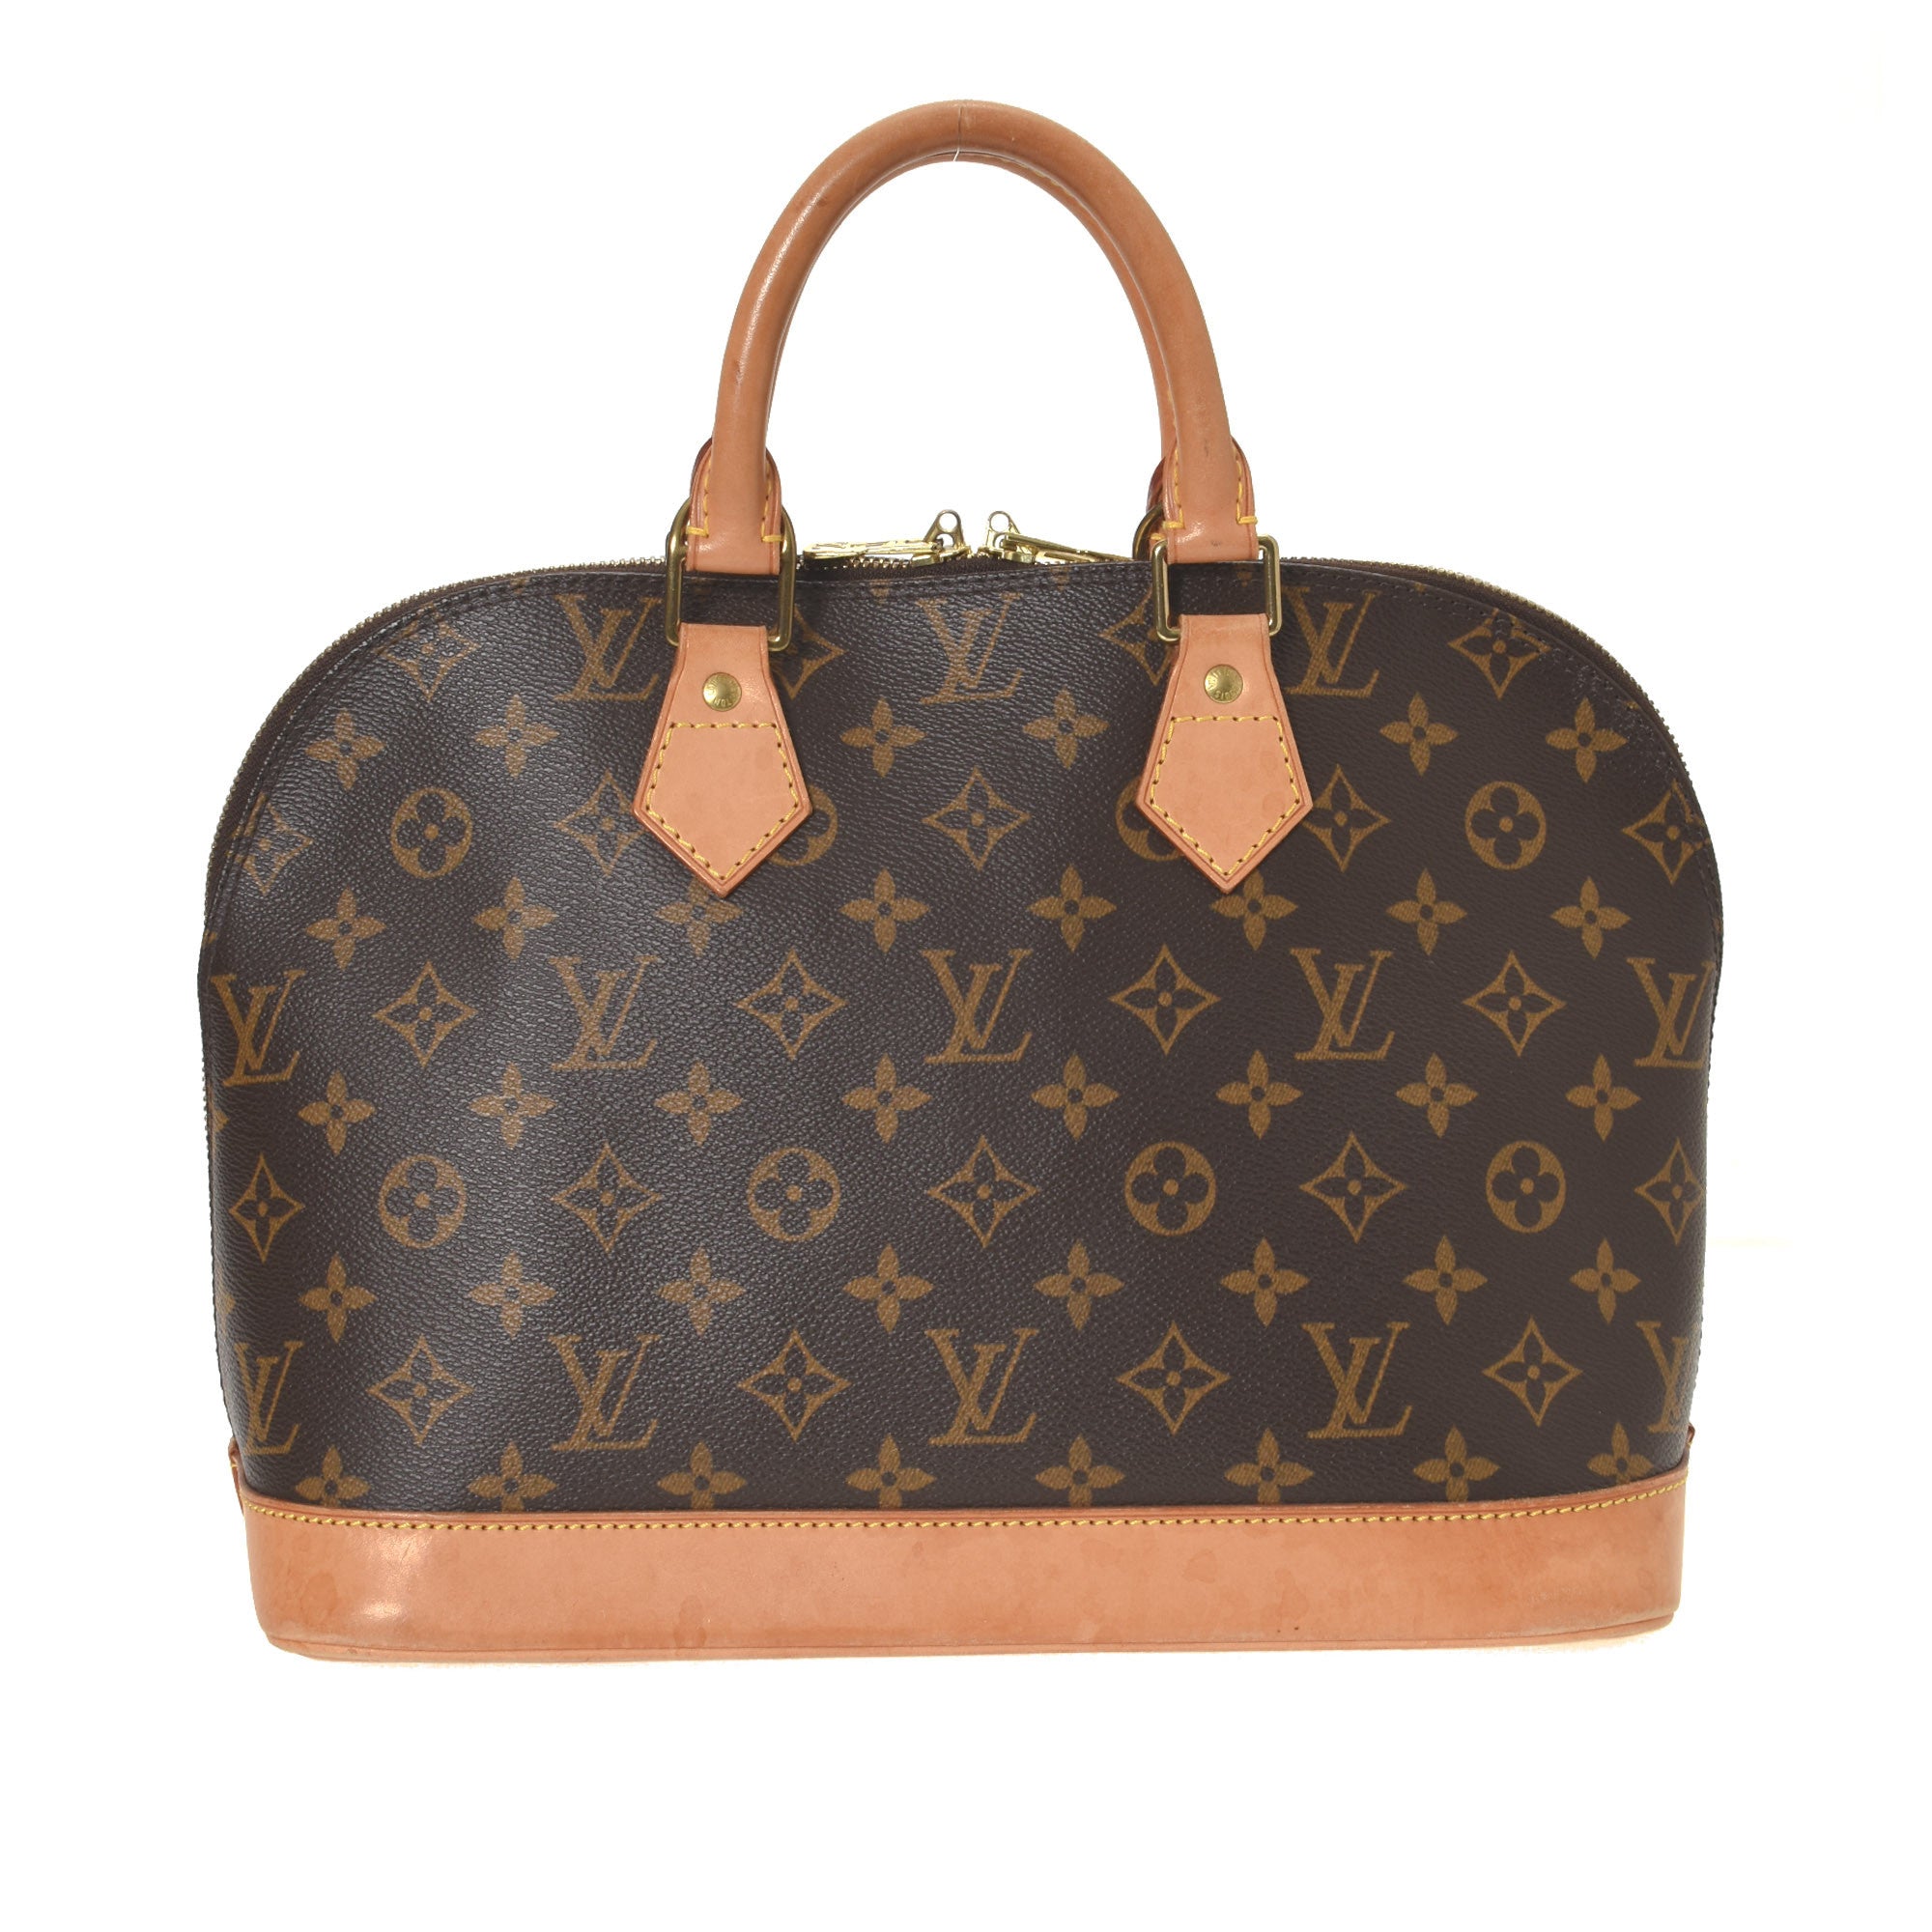 LOUIS VUITTON ALMA BB AND ODEON PM 2 YEAR WEAR AND TEAR! WHAT FITS